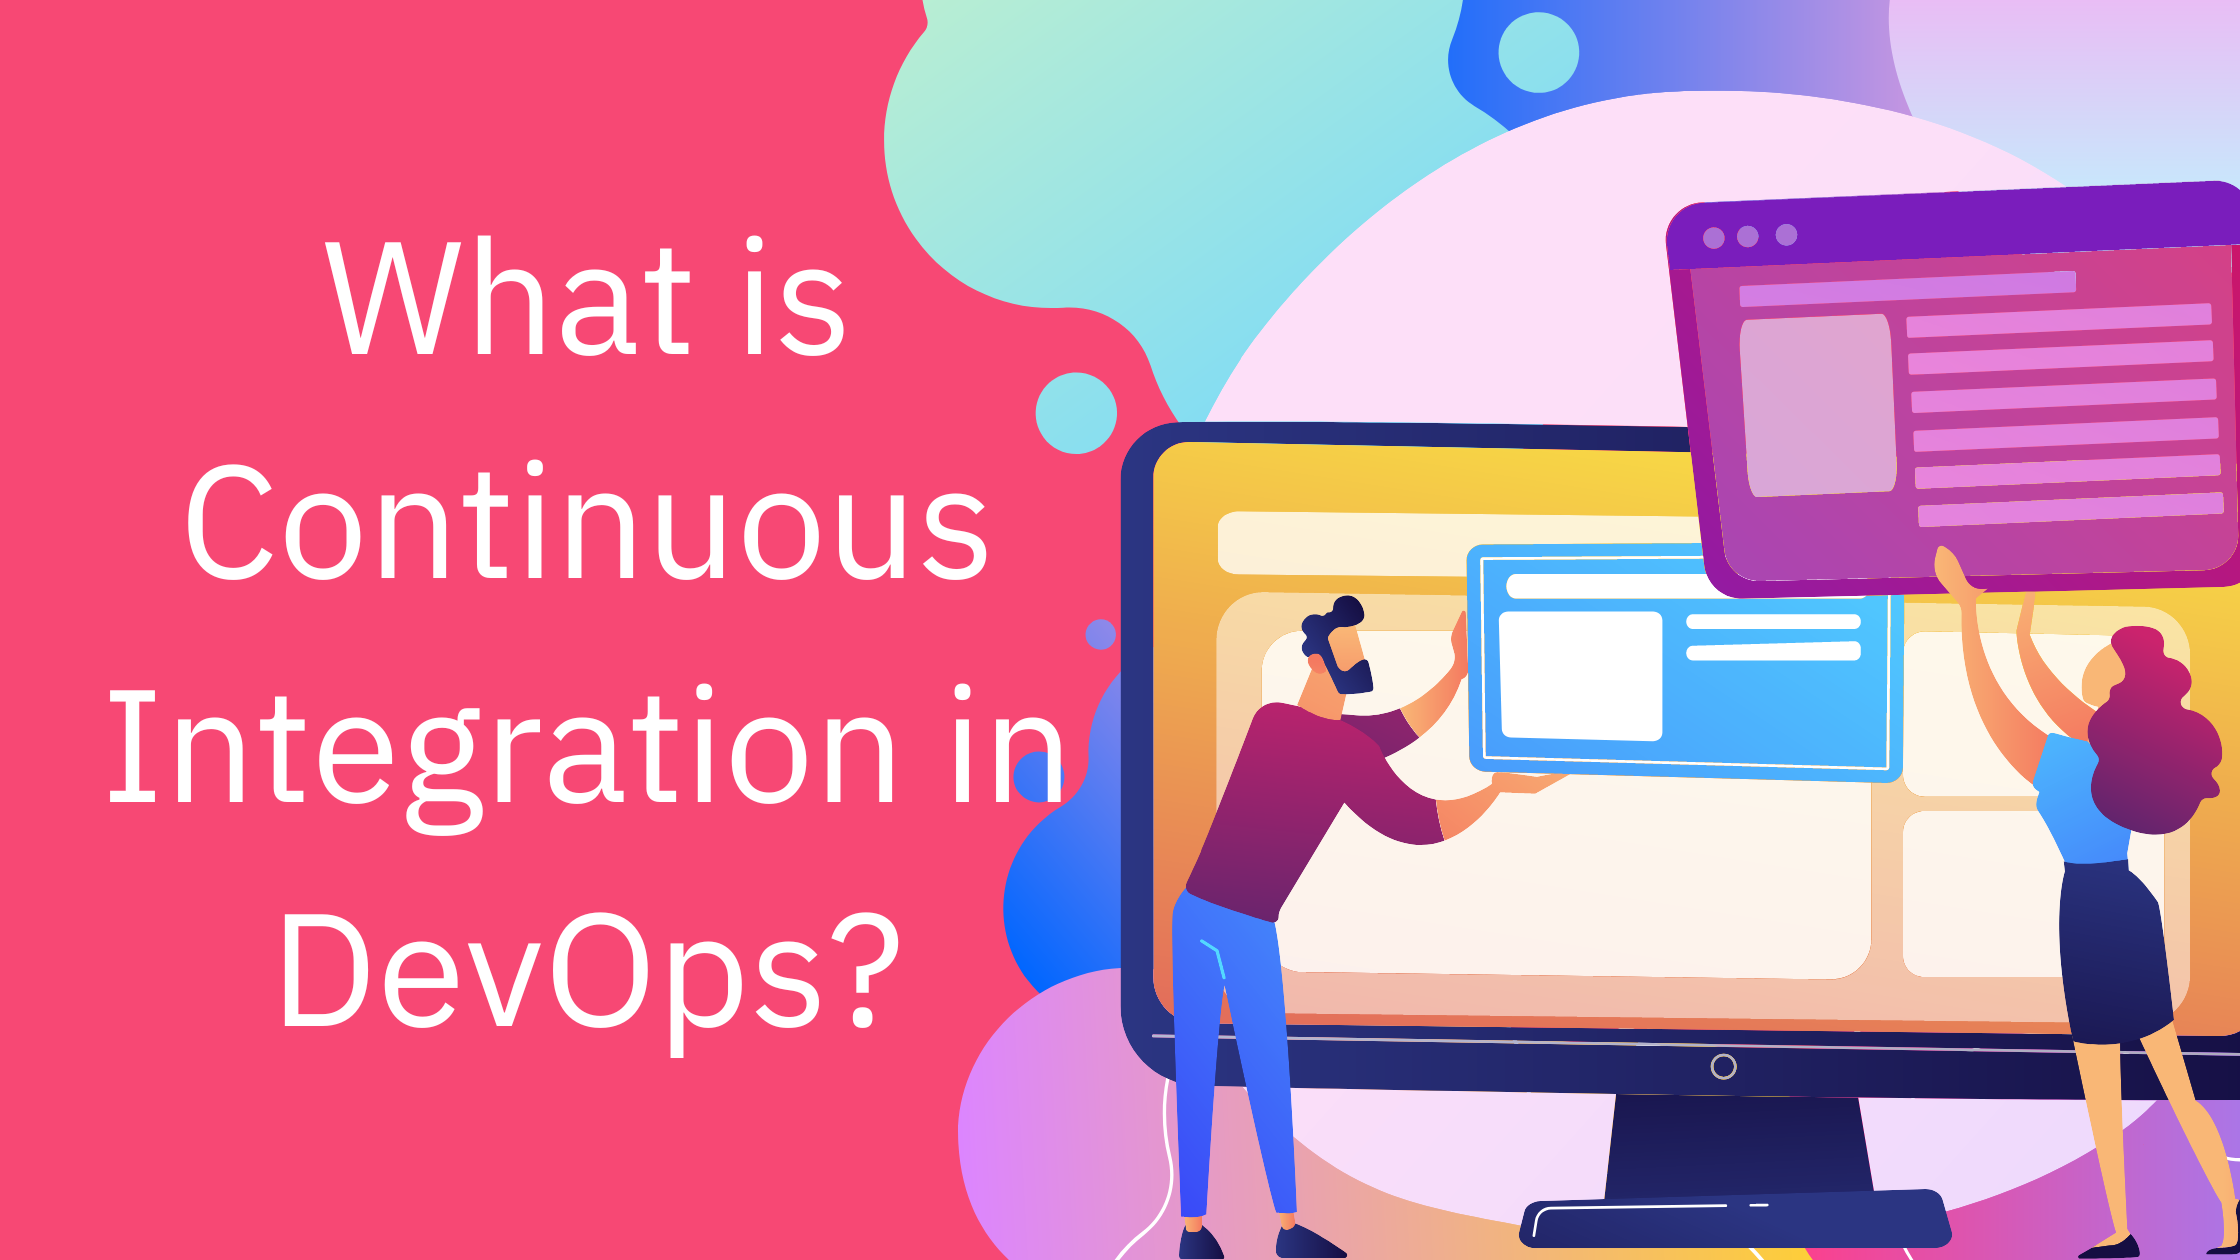 What is Continuous Integration in DevOps?